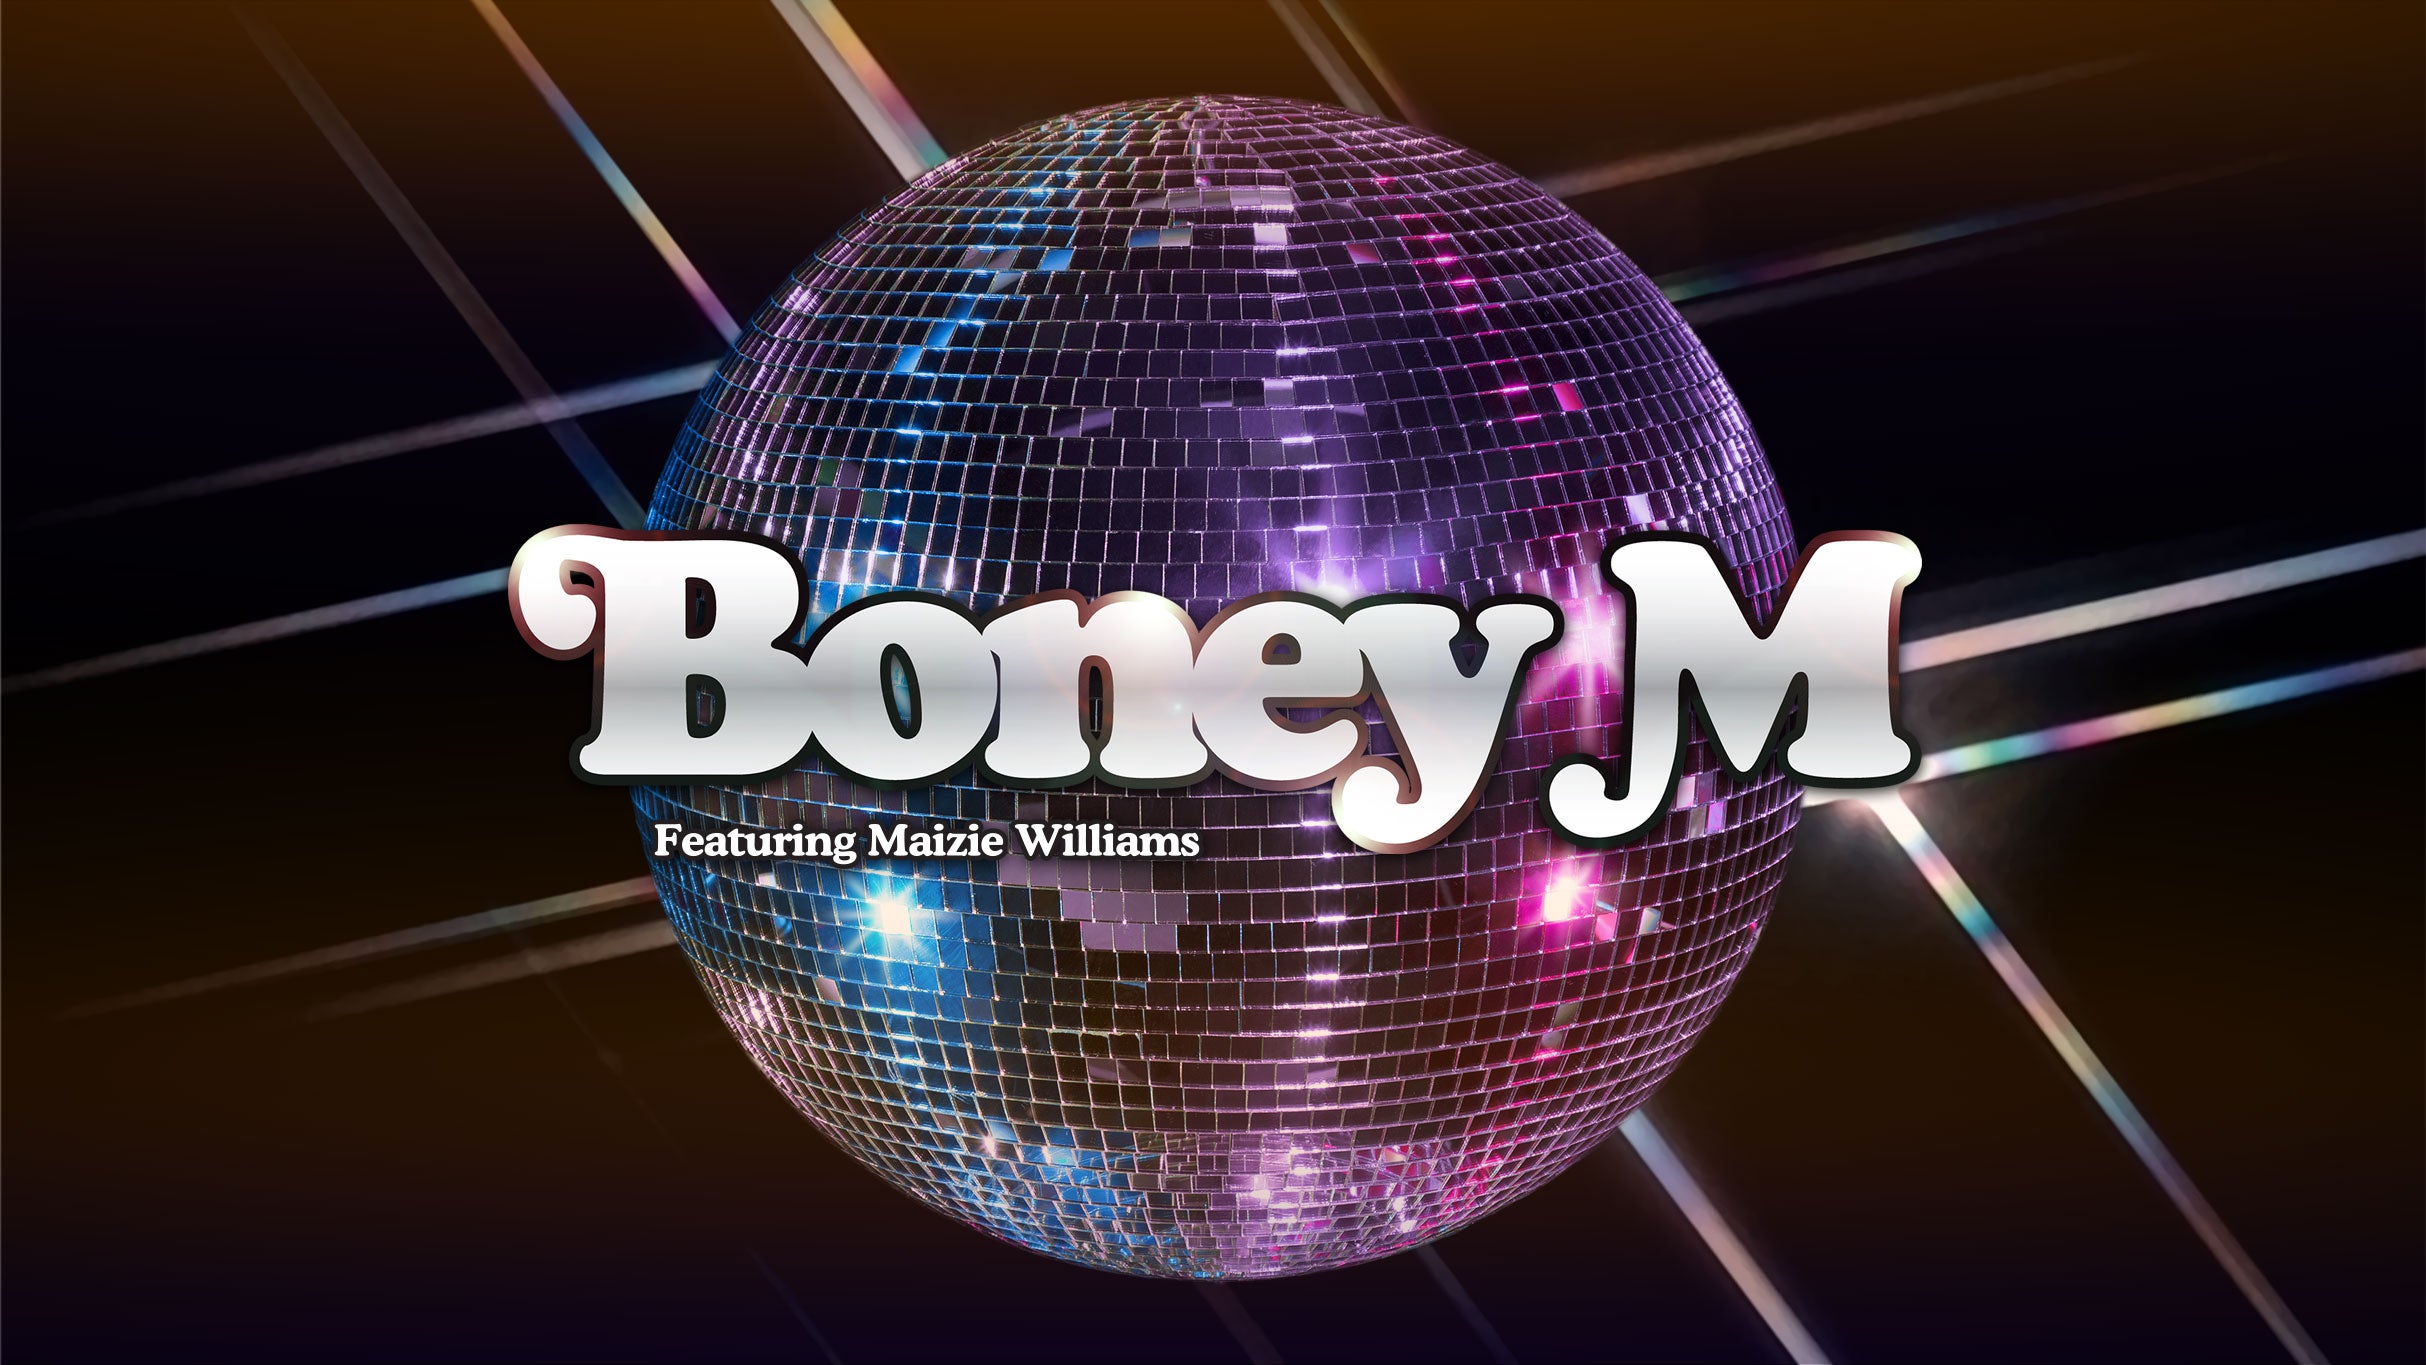 Image used with permission from Ticketmaster | Boney M - The Farewell Tour tickets